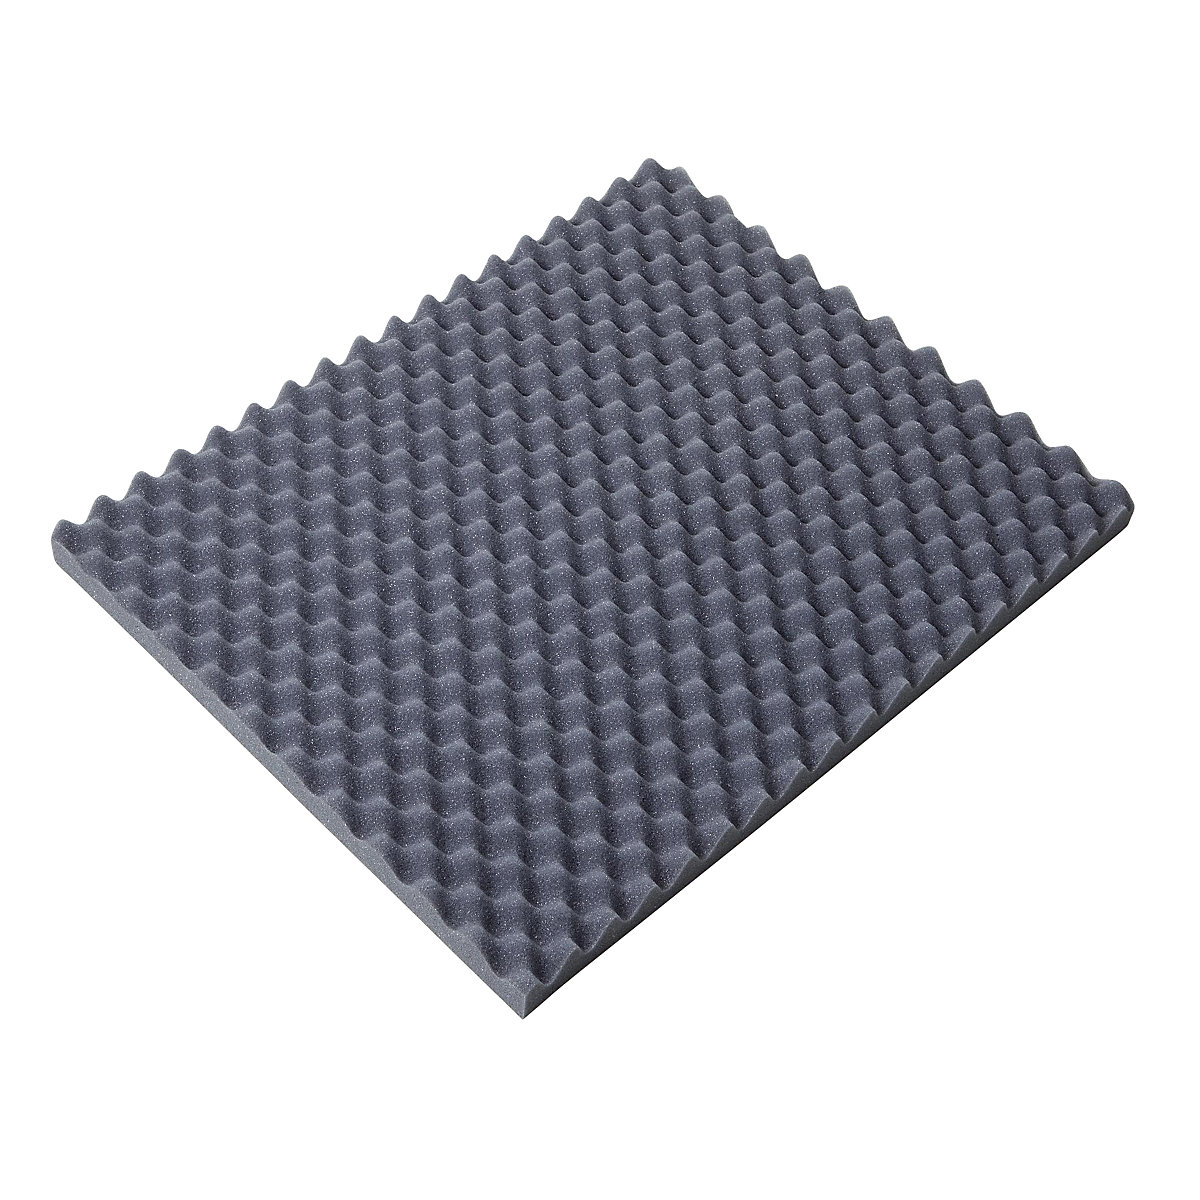 Egg crate foam sheet, 40 mm thick, LxW 500 x 400 mm, pack of 26-7